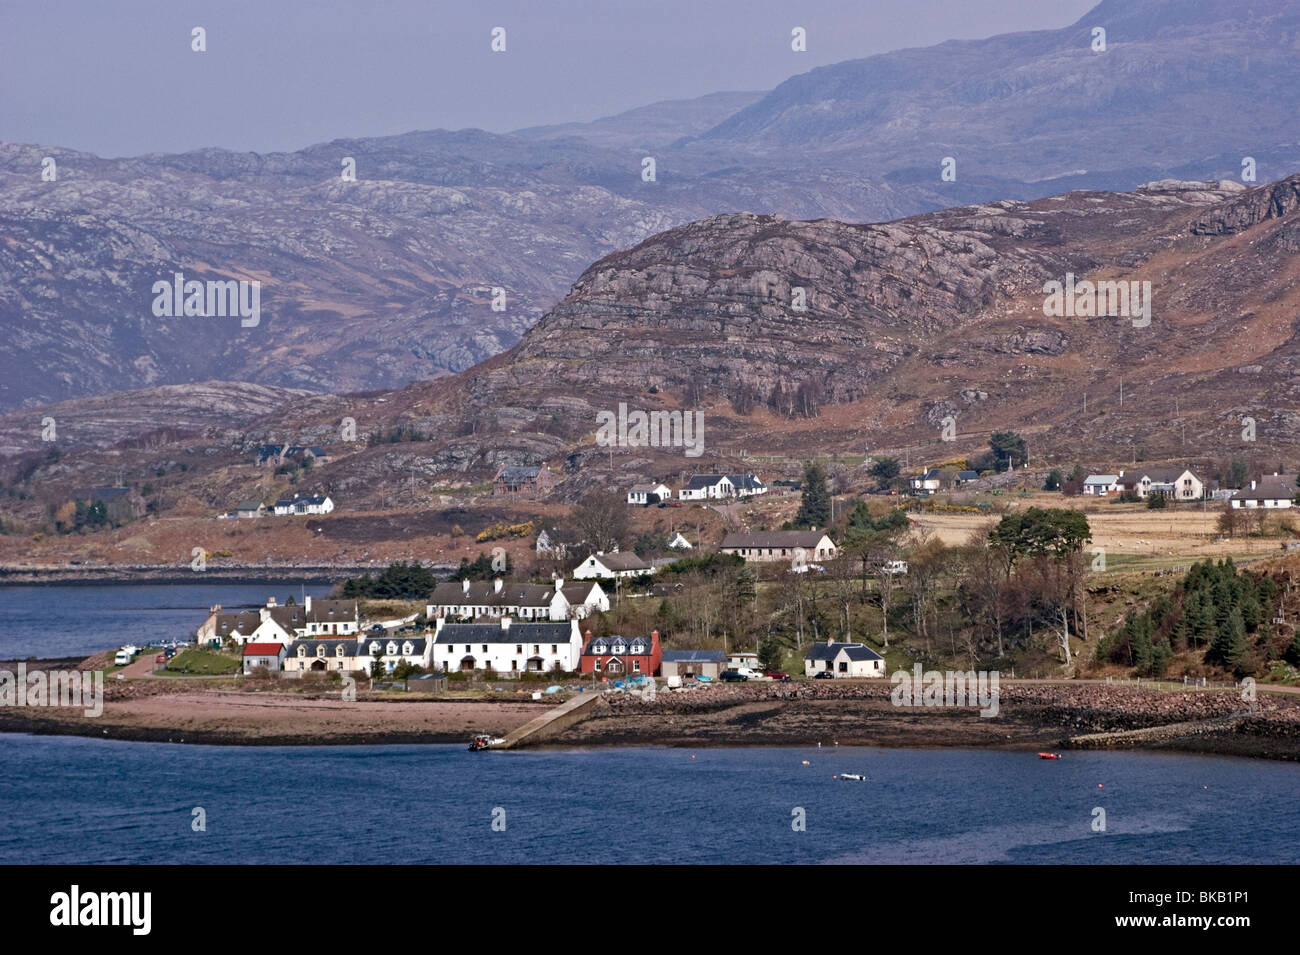 The small village of Shieldaig located at Loch Shieldaig just south of Loch Torridon in Western Highlands of Scotland Stock Photo